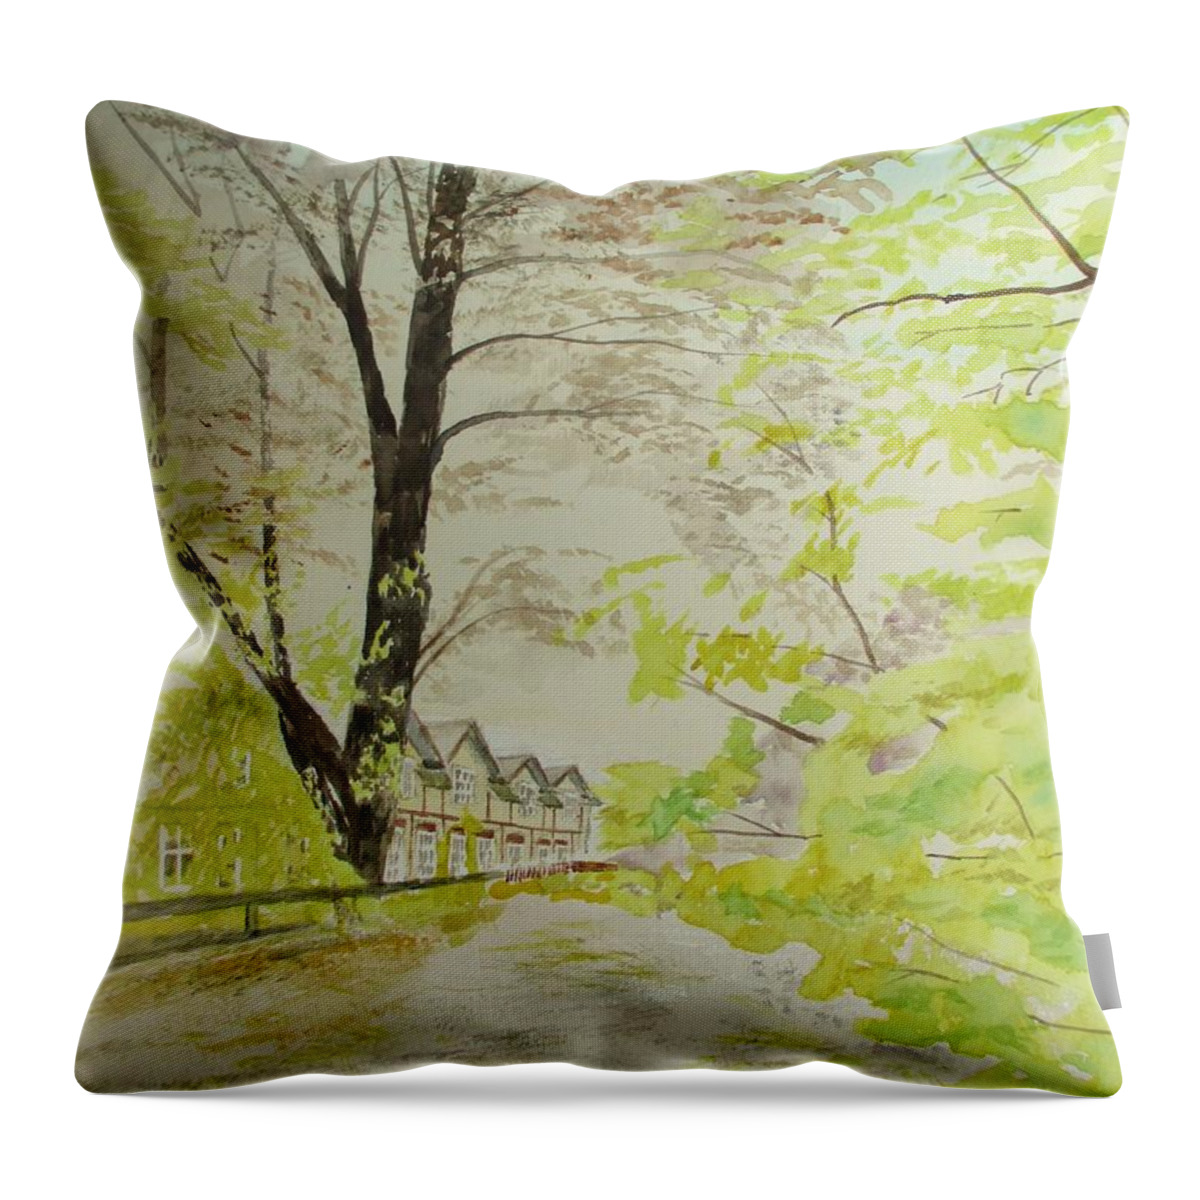 Down By The Old School Throw Pillow featuring the painting Down By The Old School by Martin Howard